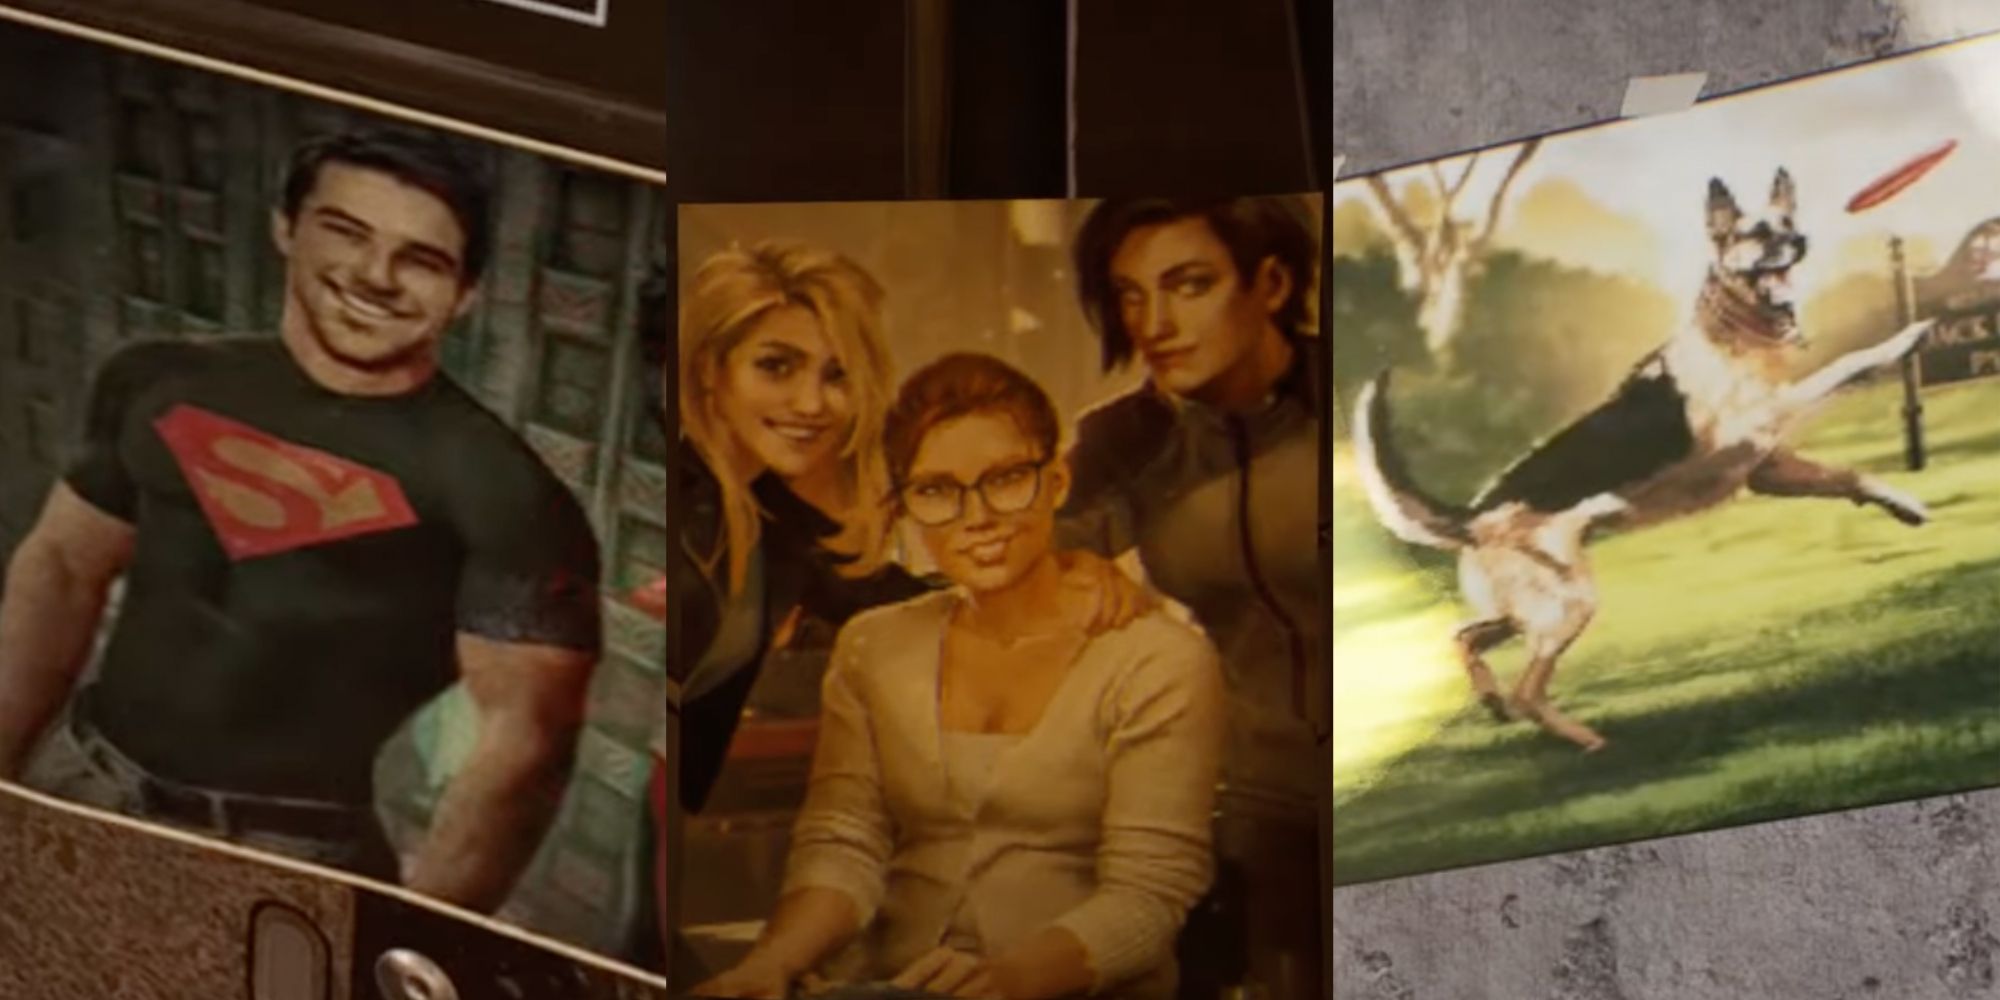 A photo of Superboy, a photo featuring Huntress, Batgirl, and Black Canary, and a photo of Ace.